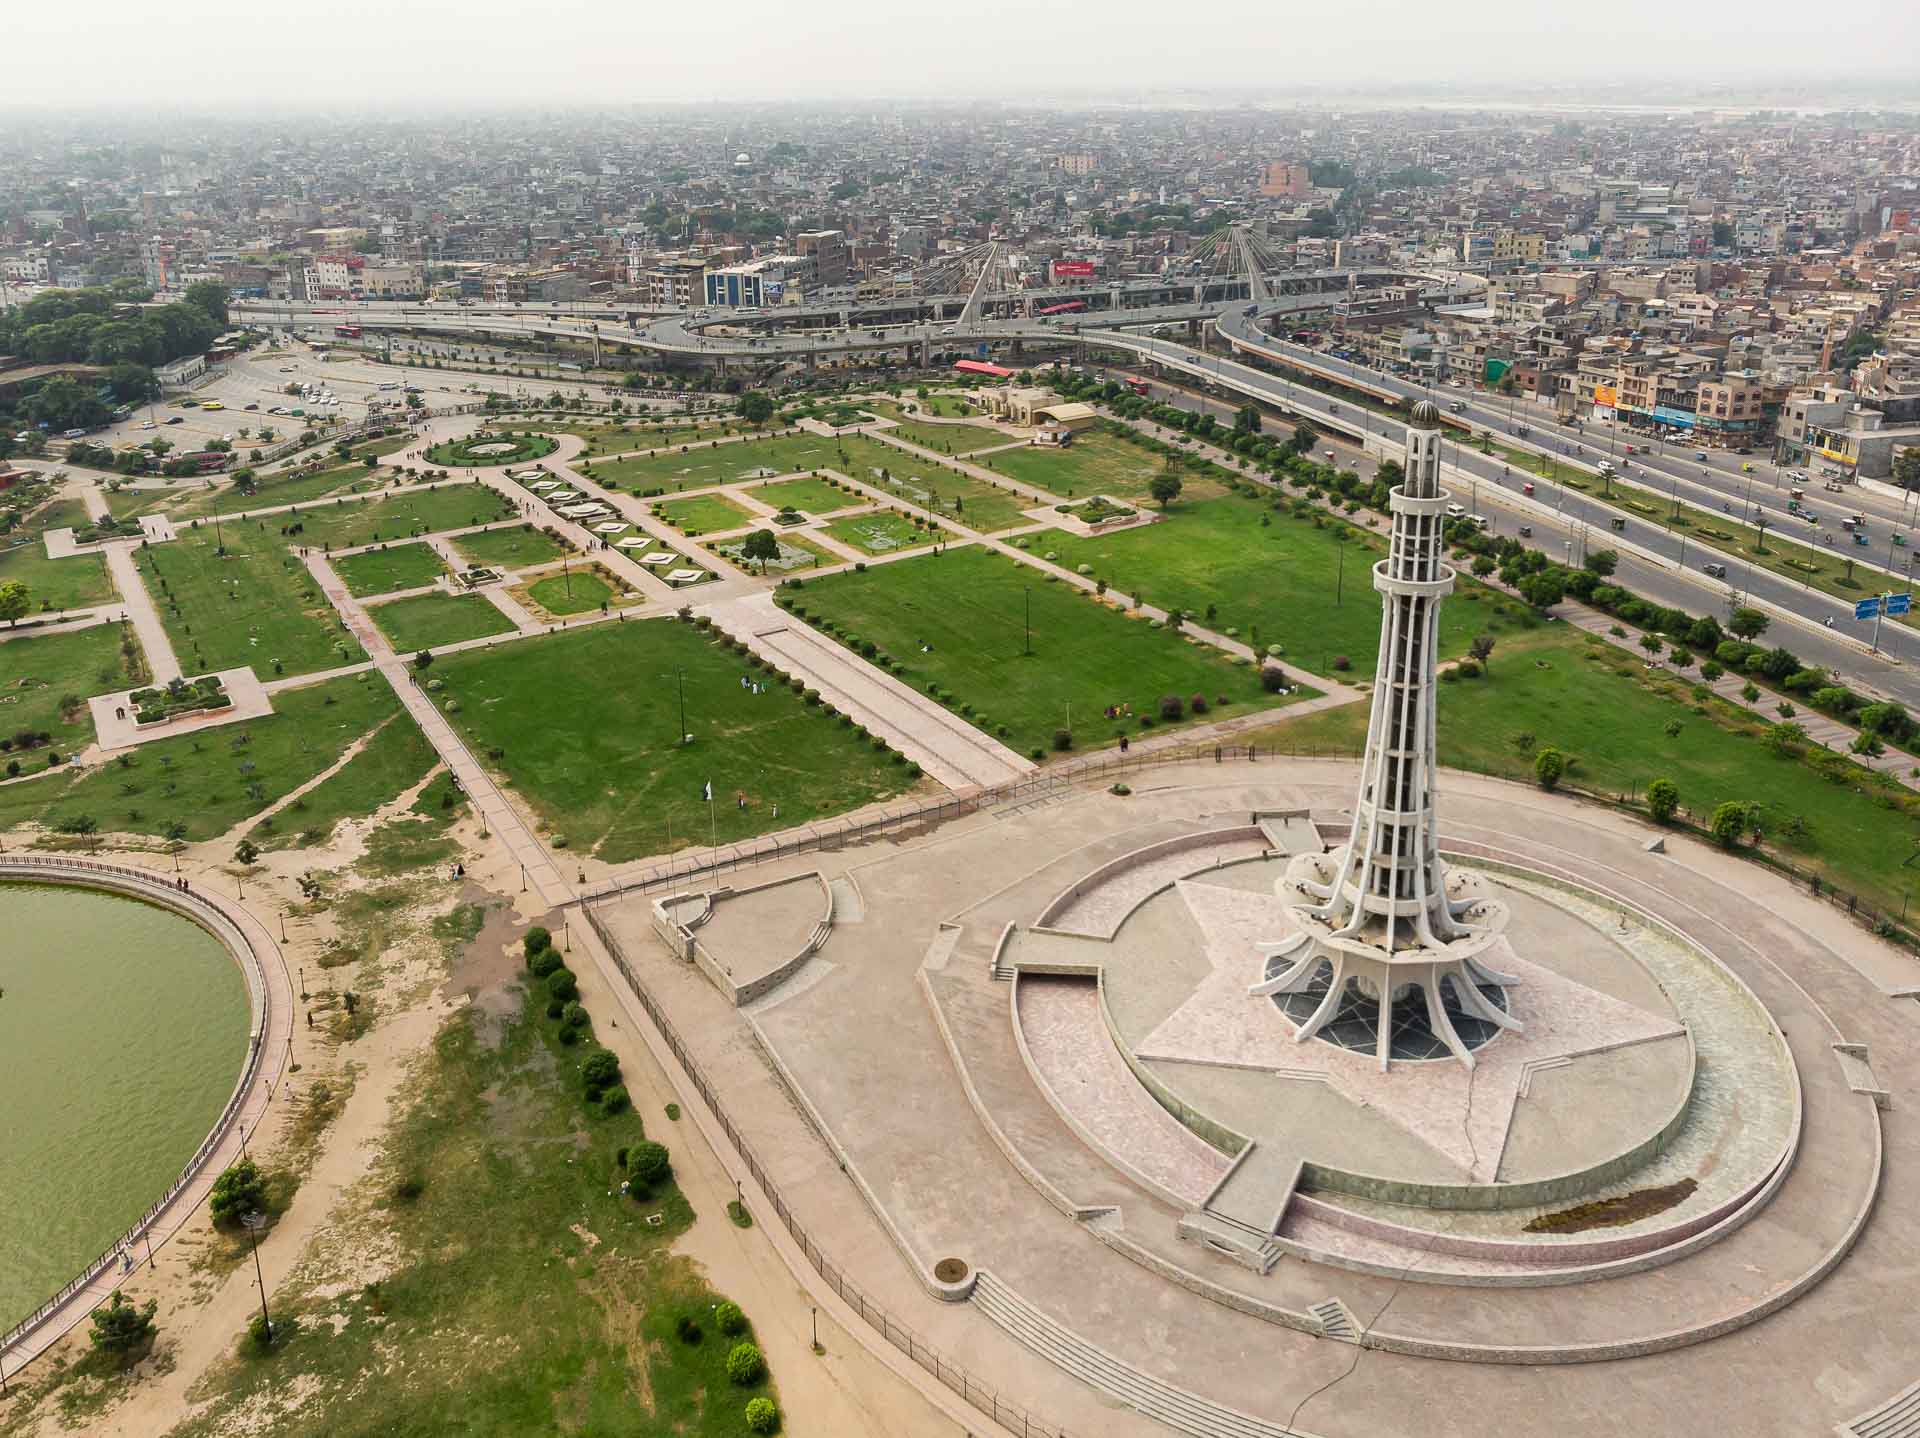 Aerial view of Iqbal Park of Lahore in Pakistan